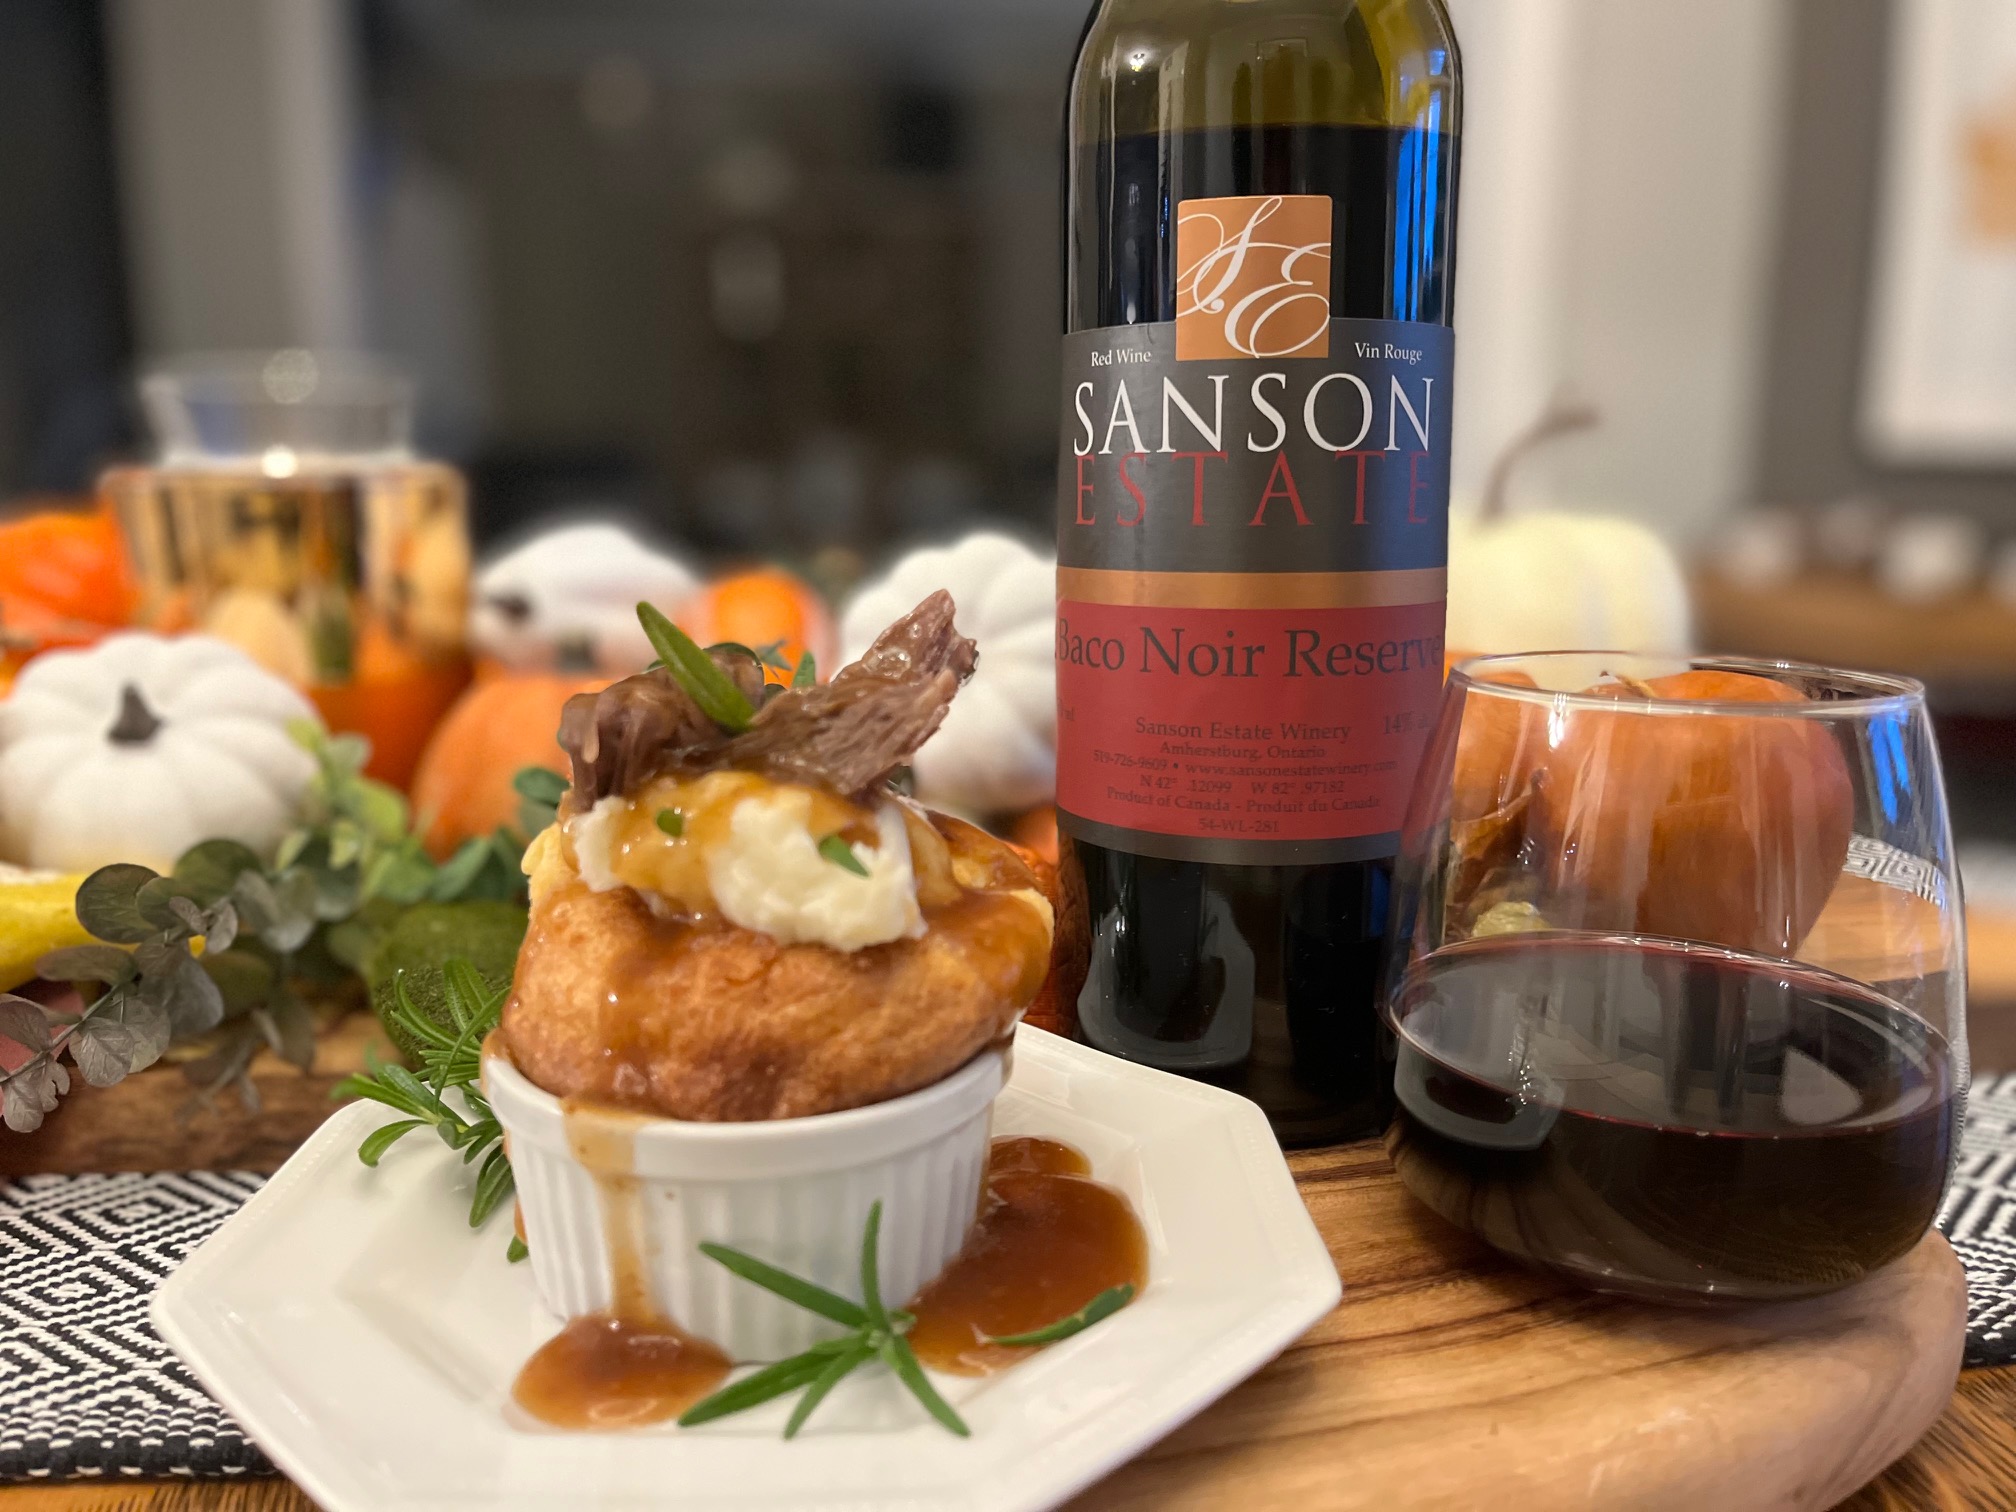 Featured image for “Sanson Estate Winery Baco Noir Reserve with Beef Stuffed Yorkshire Pudding.”